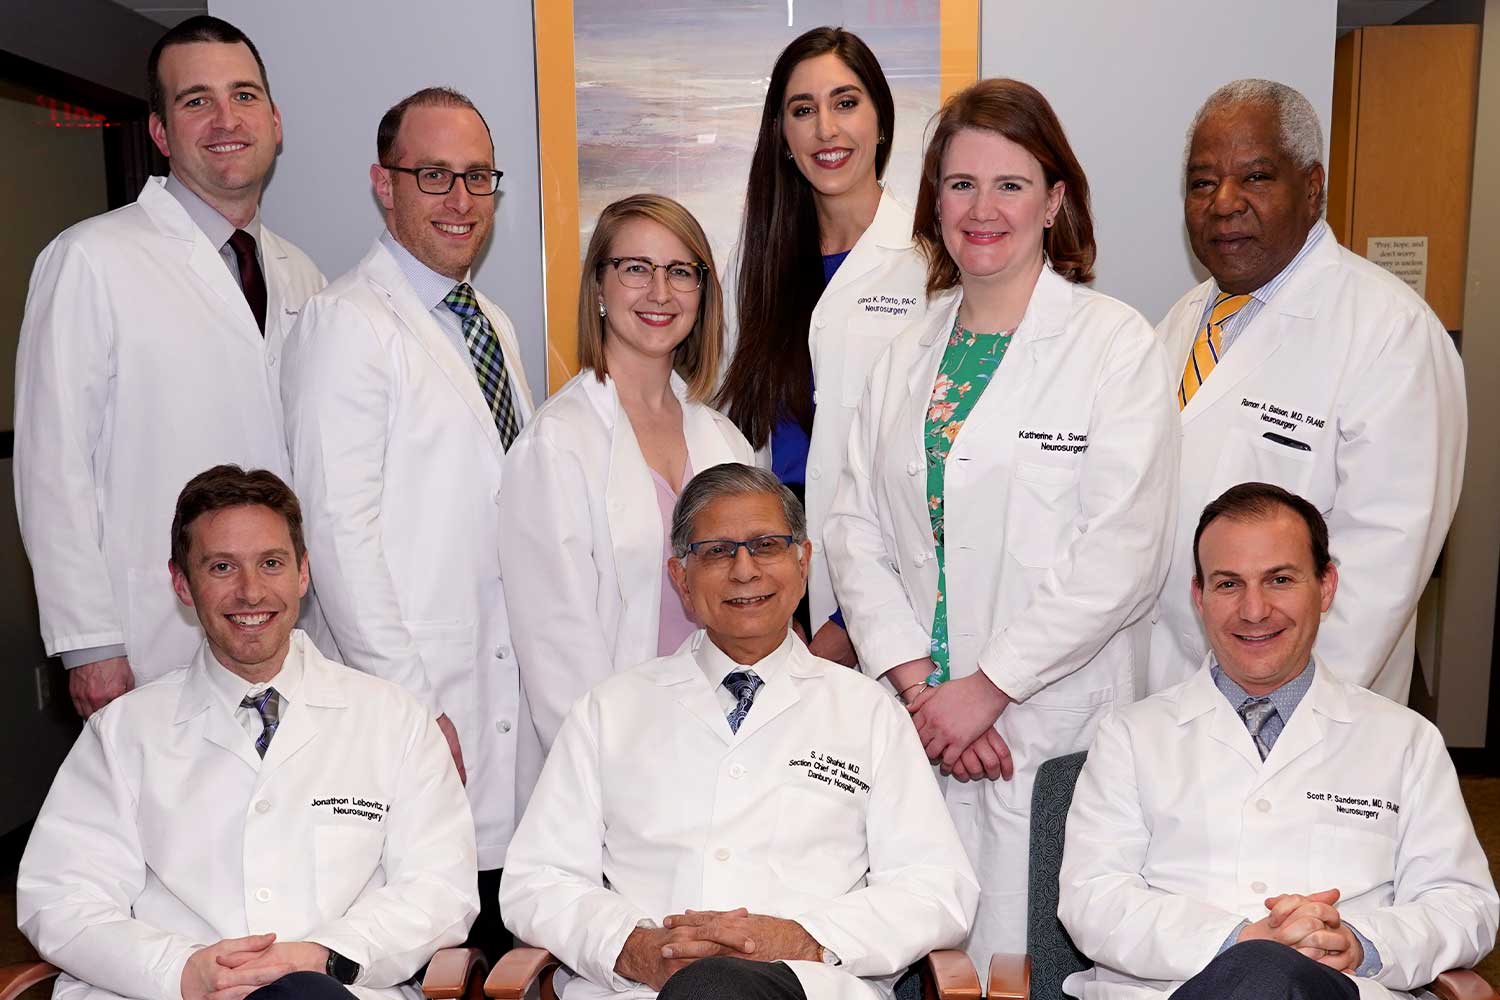 The neurosurgical specialists of Elite Brain & Spine of Connecticut taking a lively group photo in their lab coats.